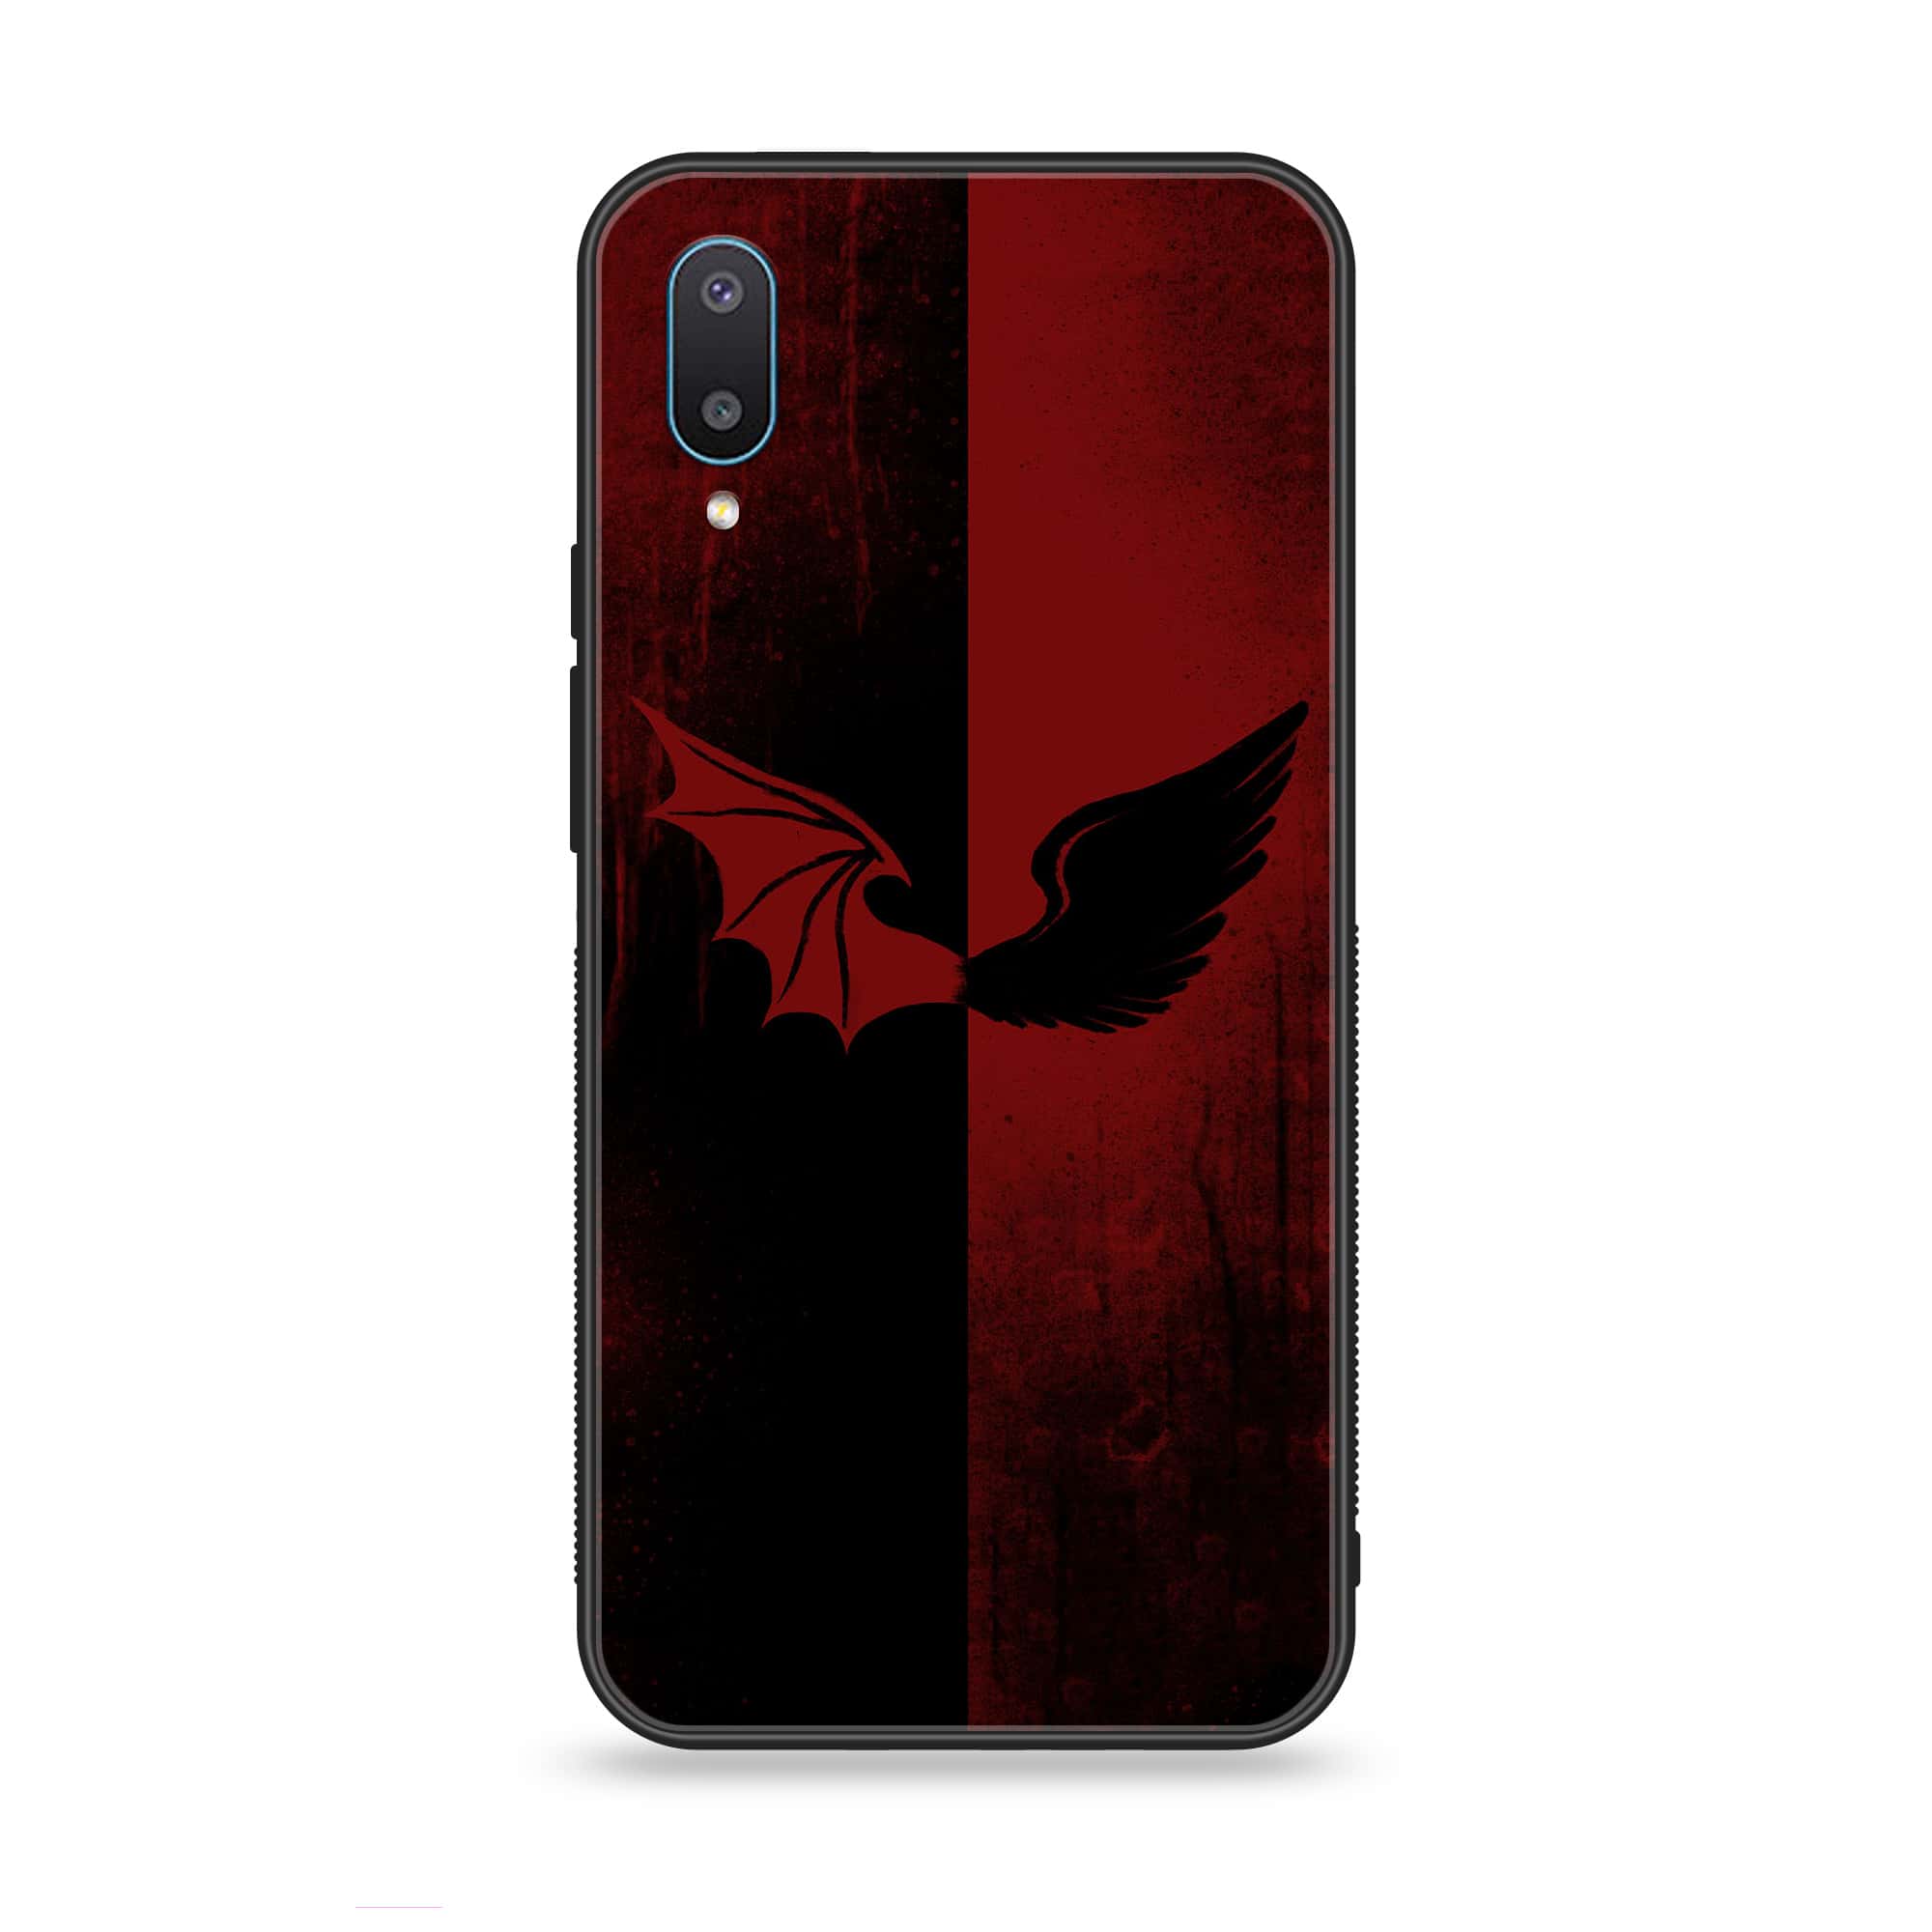 Samsung Galaxy A02 - Angel Wings 2.0 Series - Premium Printed Glass soft Bumper shock Proof Case